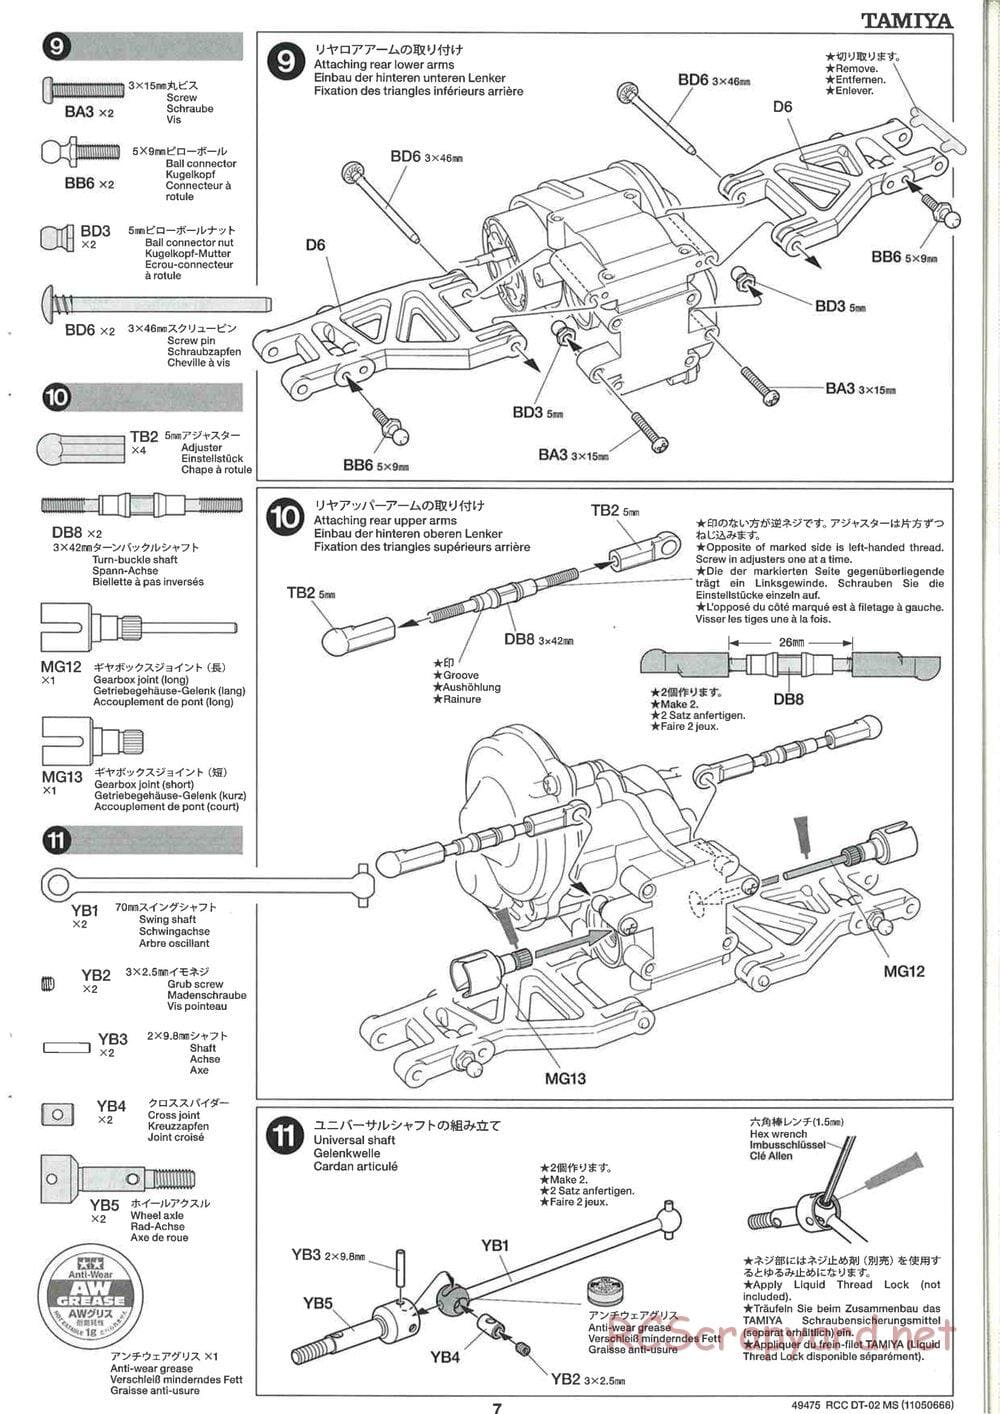 Tamiya - DT-02 MS Chassis - Manual - Page 8